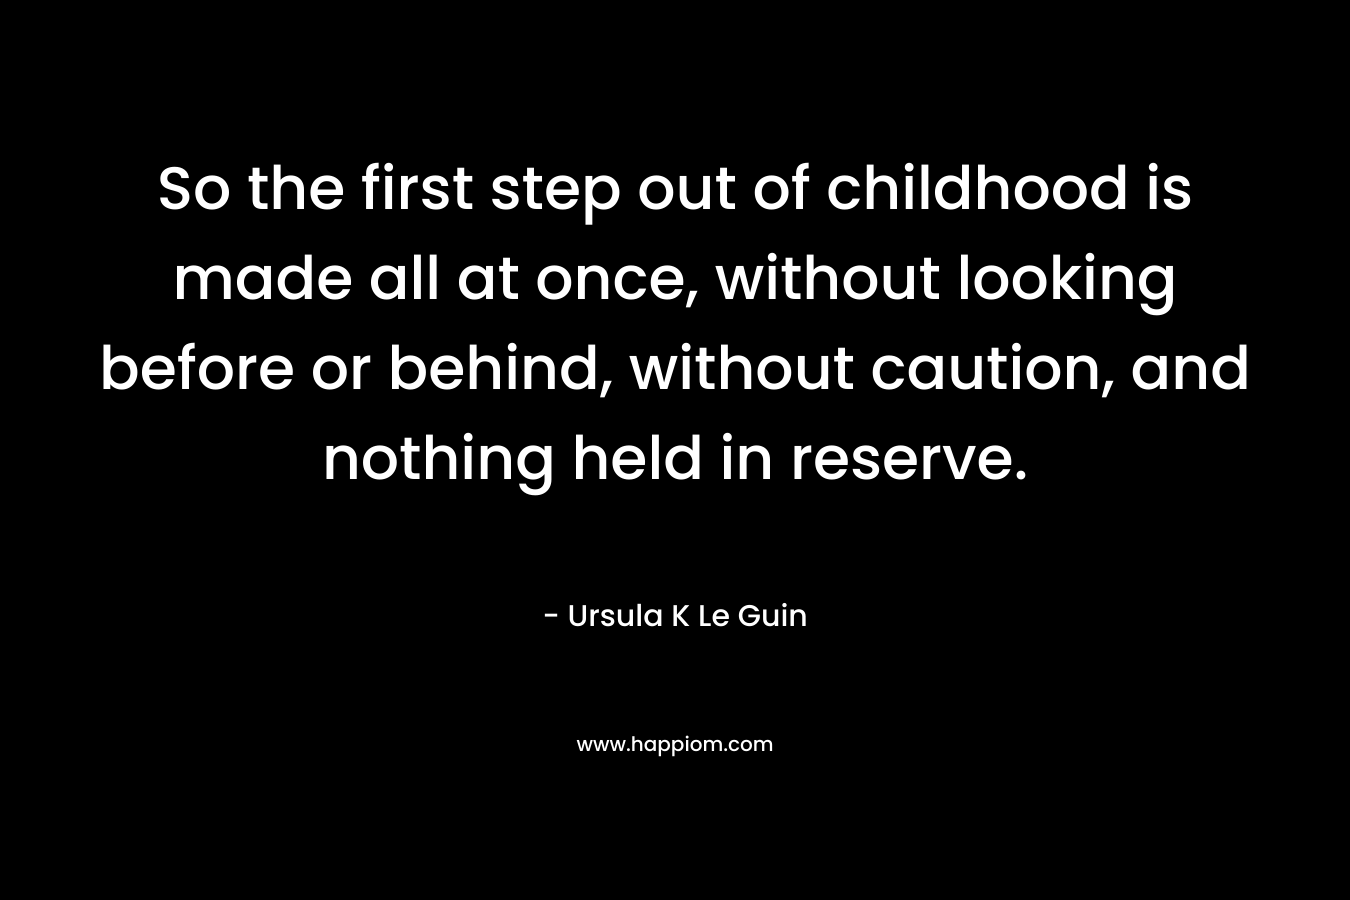 So the first step out of childhood is made all at once, without looking before or behind, without caution, and nothing held in reserve. – Ursula K Le Guin